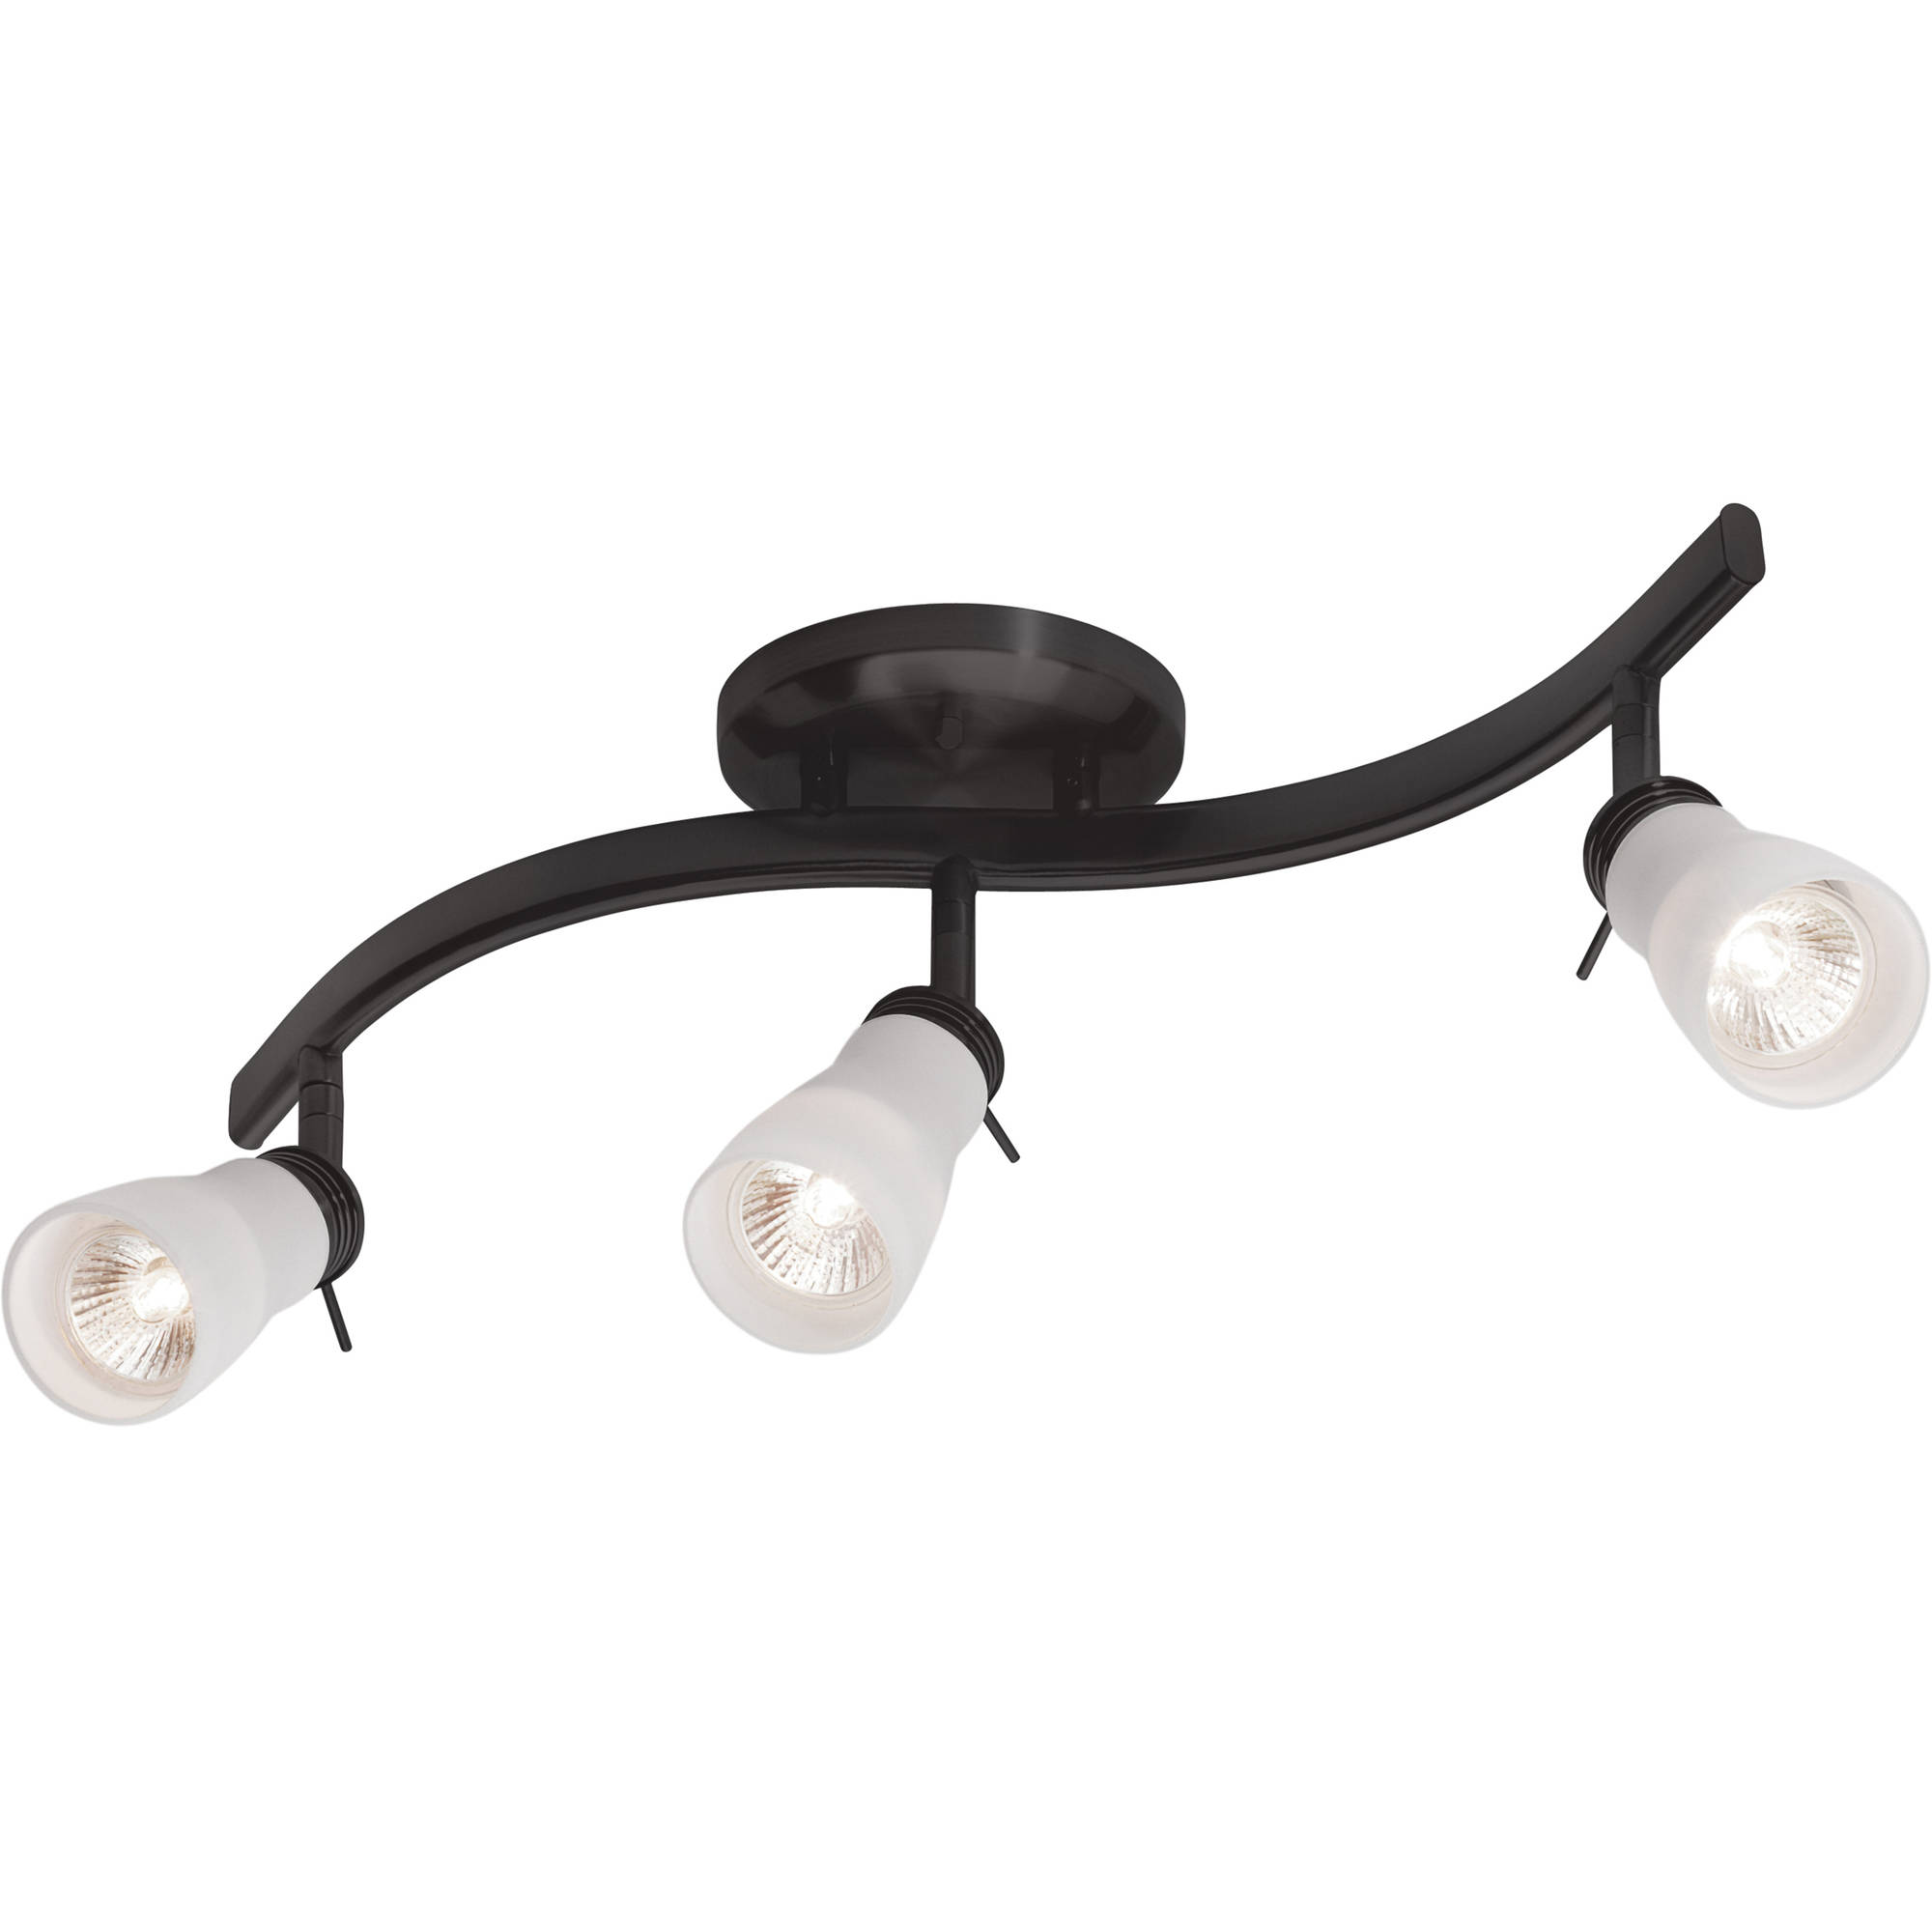 Chapter decorTrack Ceiling Light, 3 Lights, Oil-Rubbed Bronze Finish - image 1 of 5